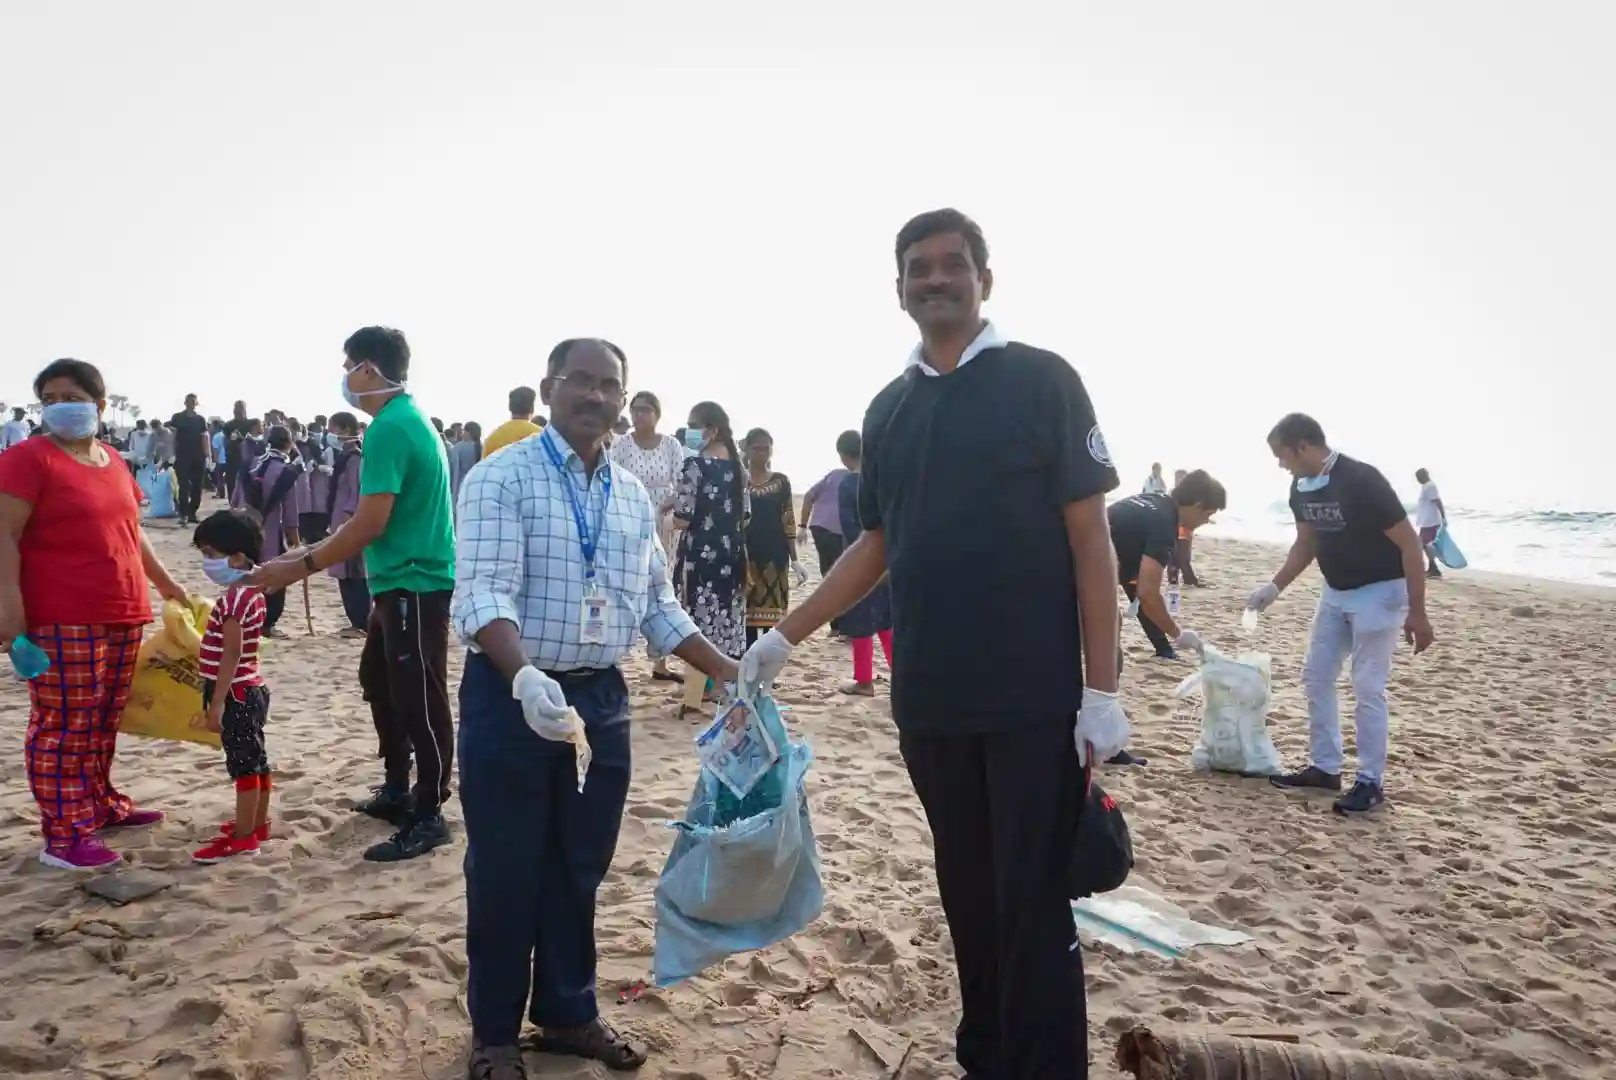 22,000 people gather in Visakhapatnam for world’s biggest beach clean-up